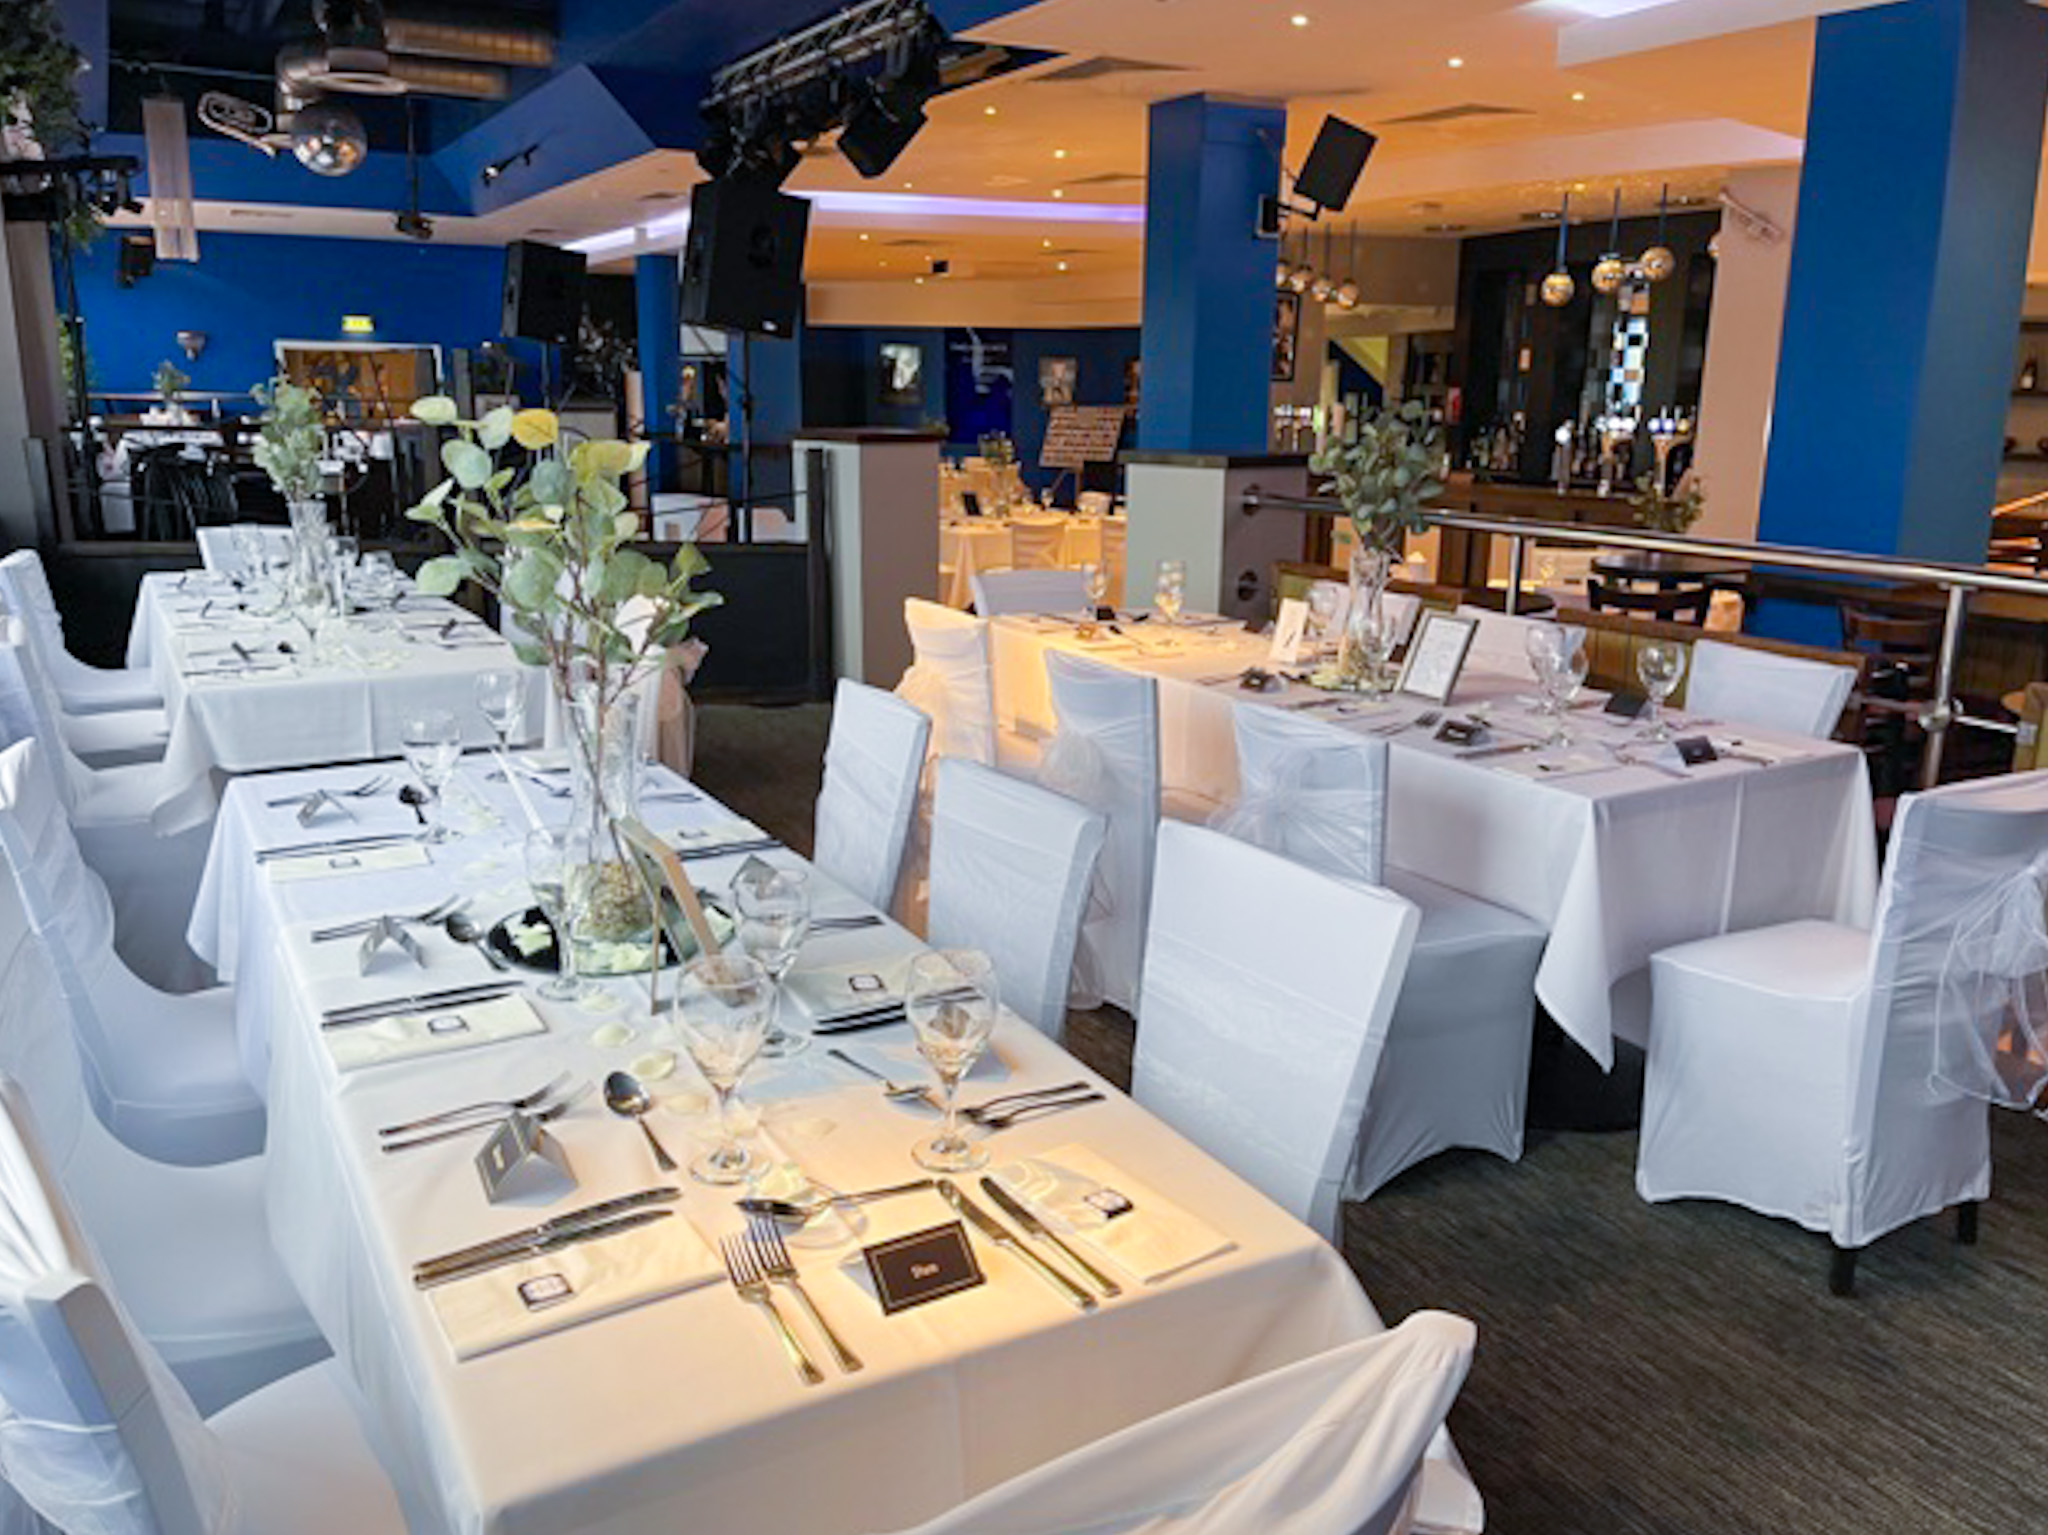 The image shows The Jazz Cafe all dressed up for a wedding with white chair covers and sashes and floral table arrangements.